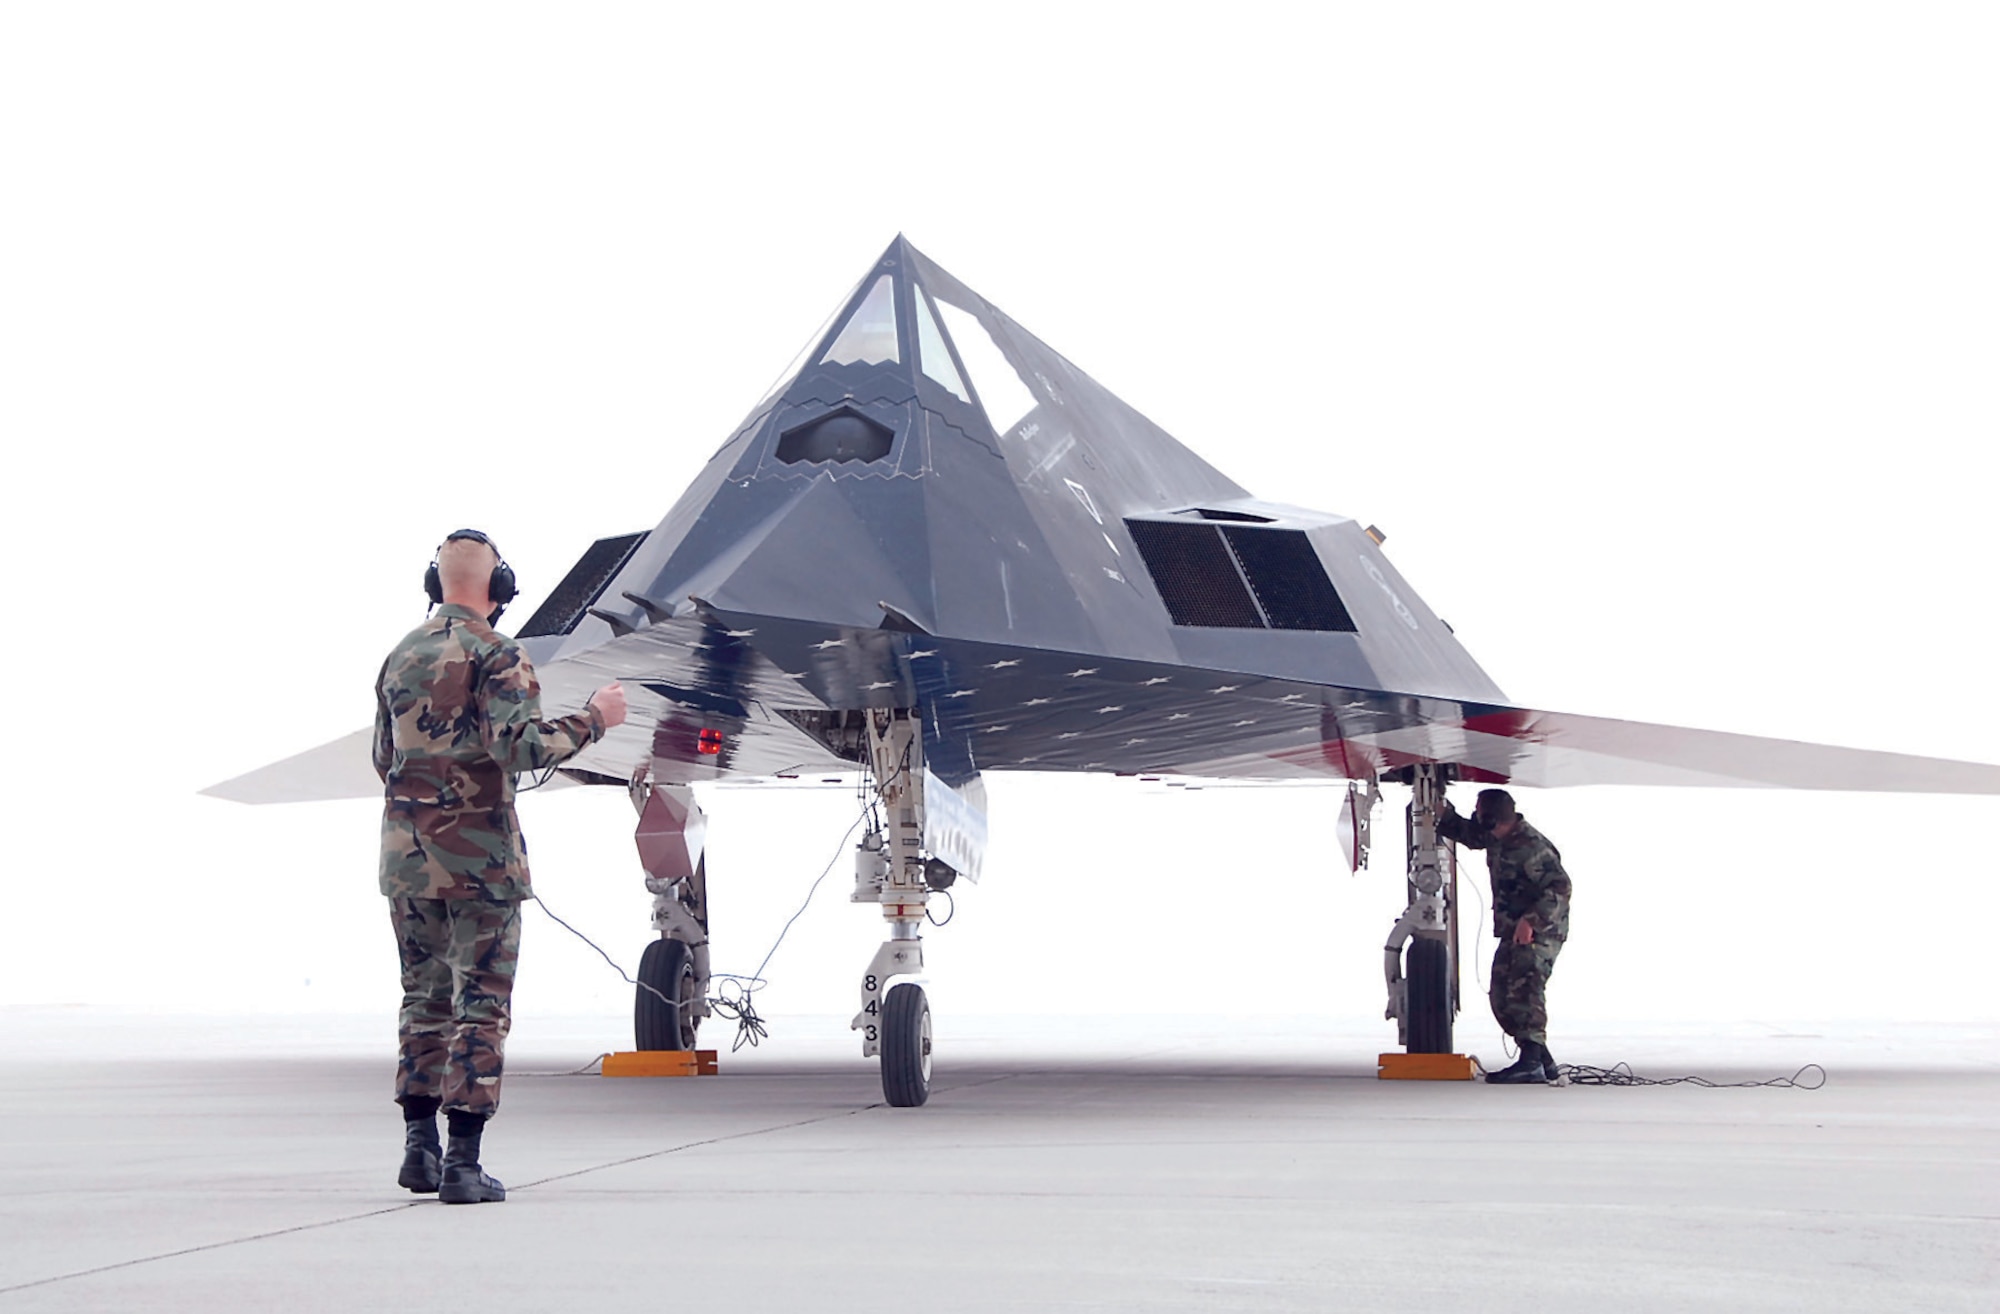 Airmen deployed from the 49th Fighter Wing prepare to launch an F-117A Nighthawk from a foggy ramp at Wright-Patterson Air Force Base on Mar. 11. After 27 years of  service Air Force officials will retire the F-117 fleet to free up funds for modernization.  (U.S. Air Force photo/Christy Webb)